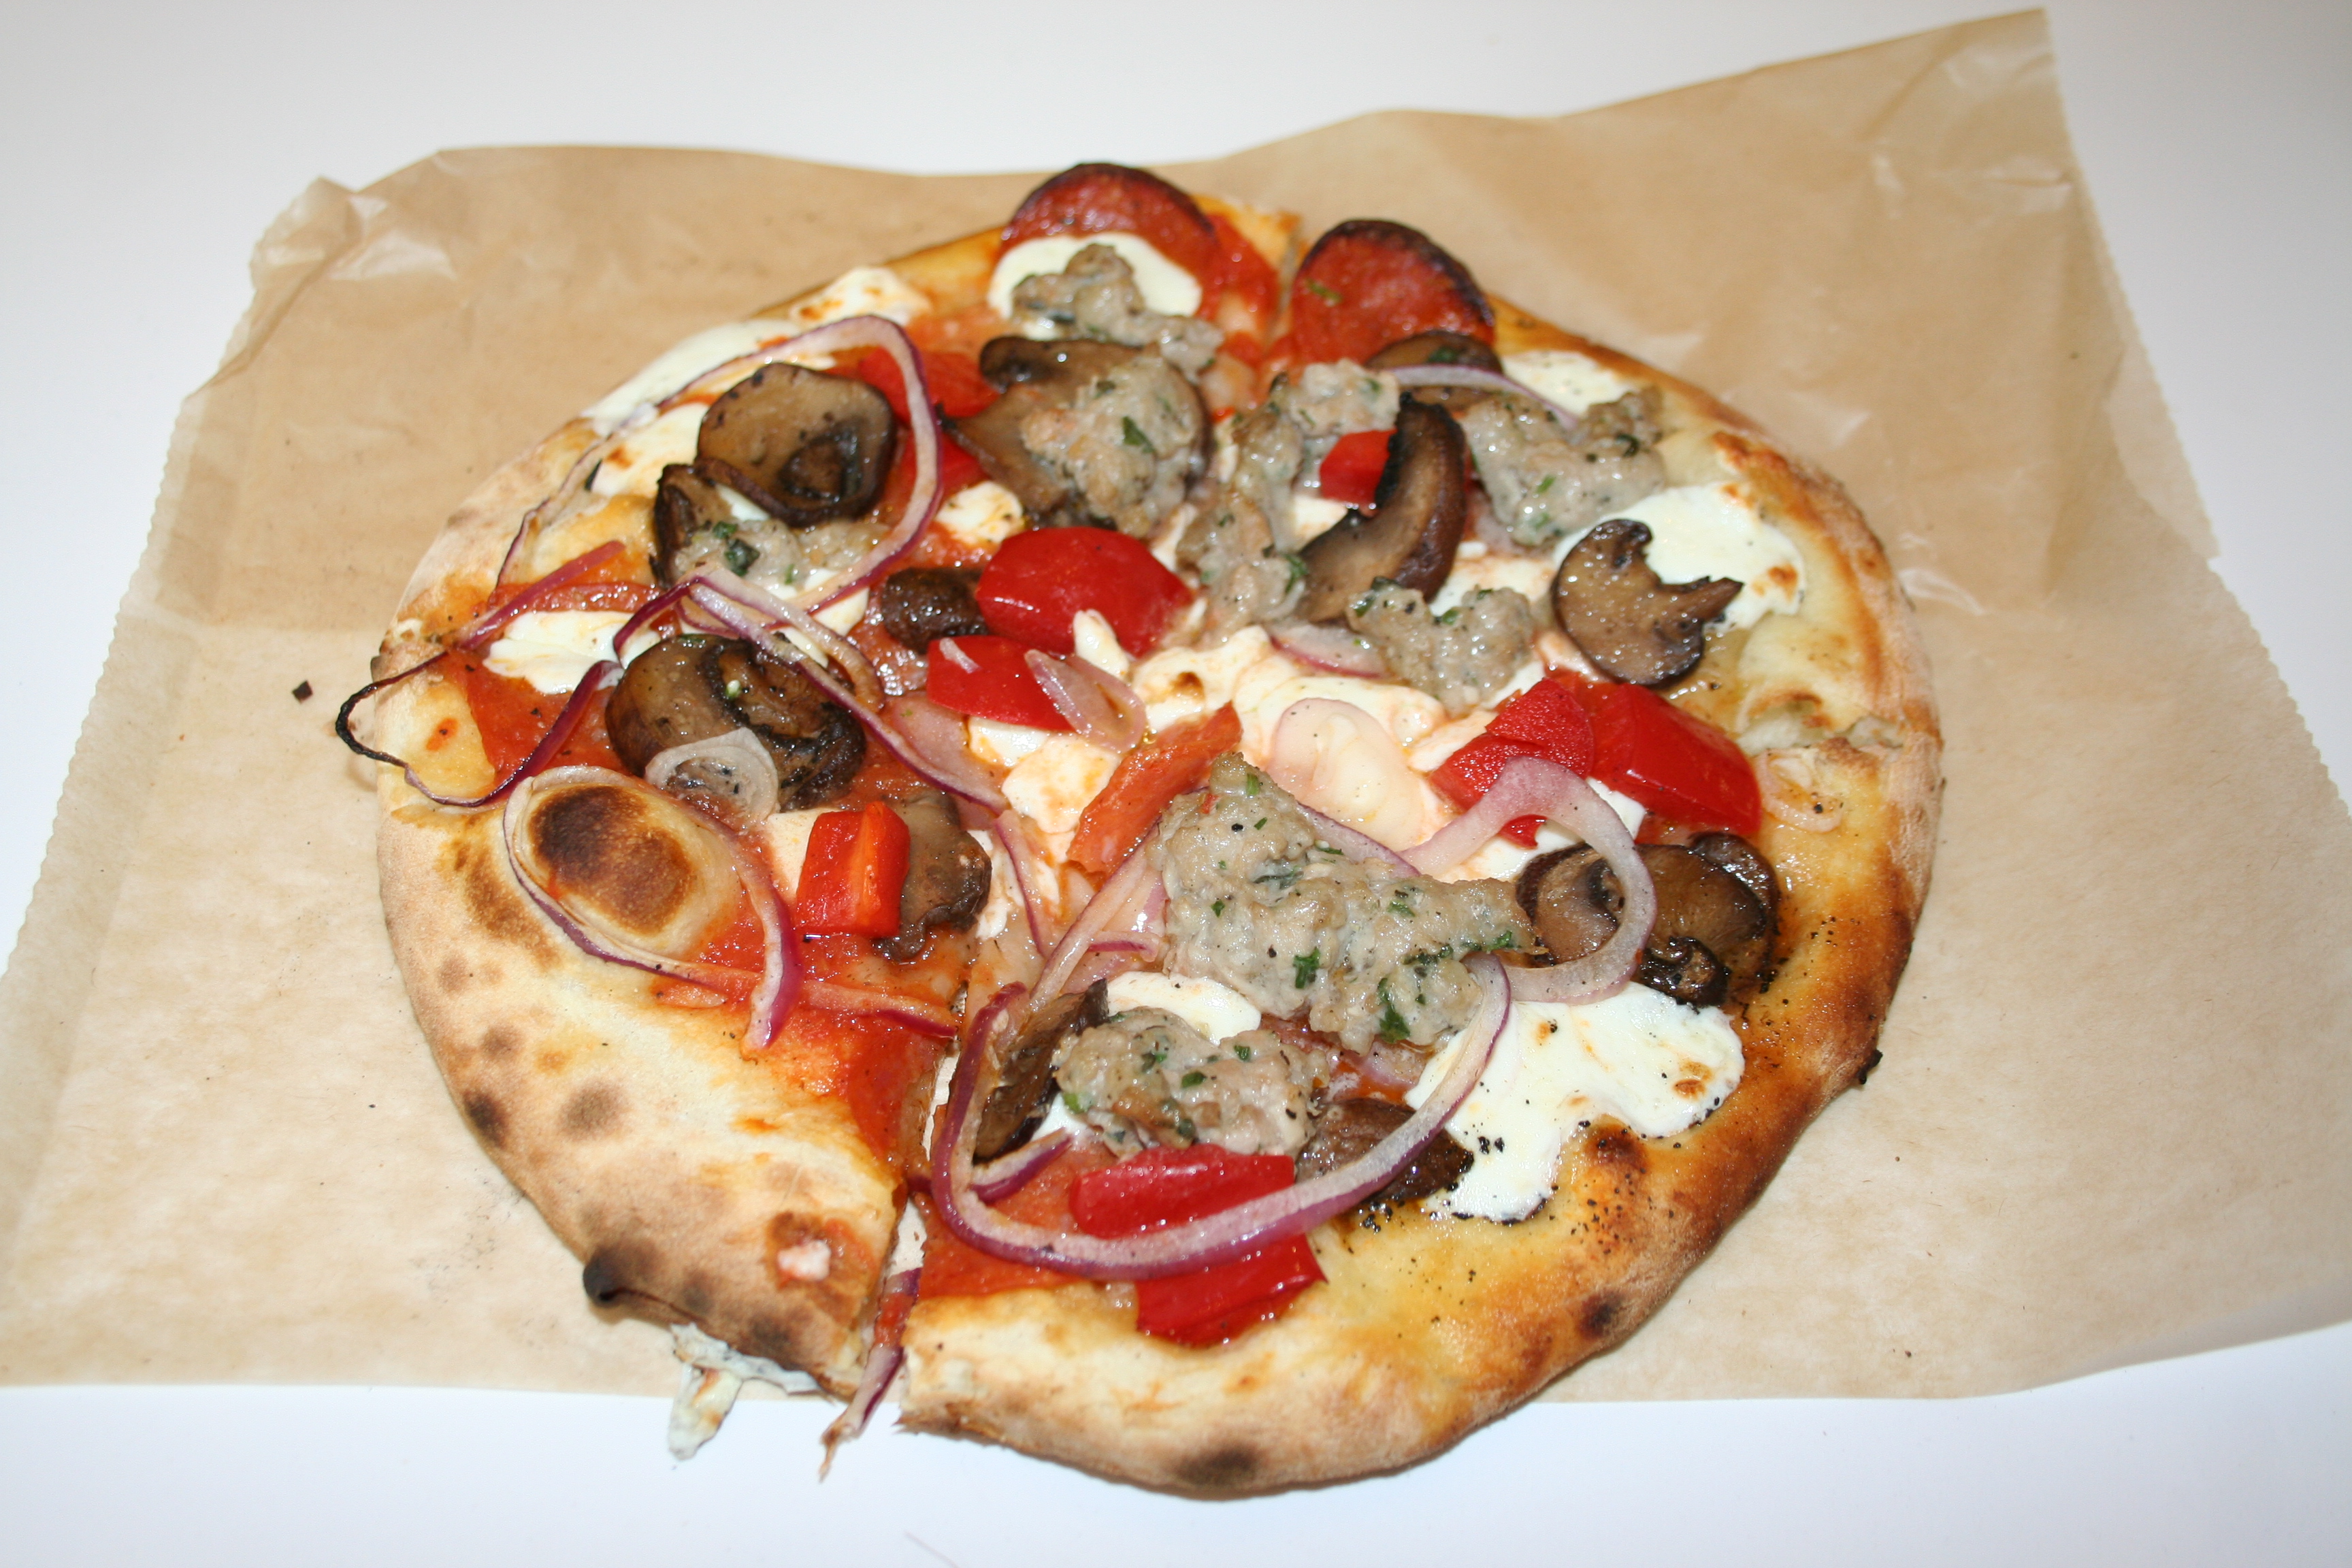 The Butcher personal pizza from Veloce with added mushrooms. (Photo: Mark Heckathorn/DC on Heels)